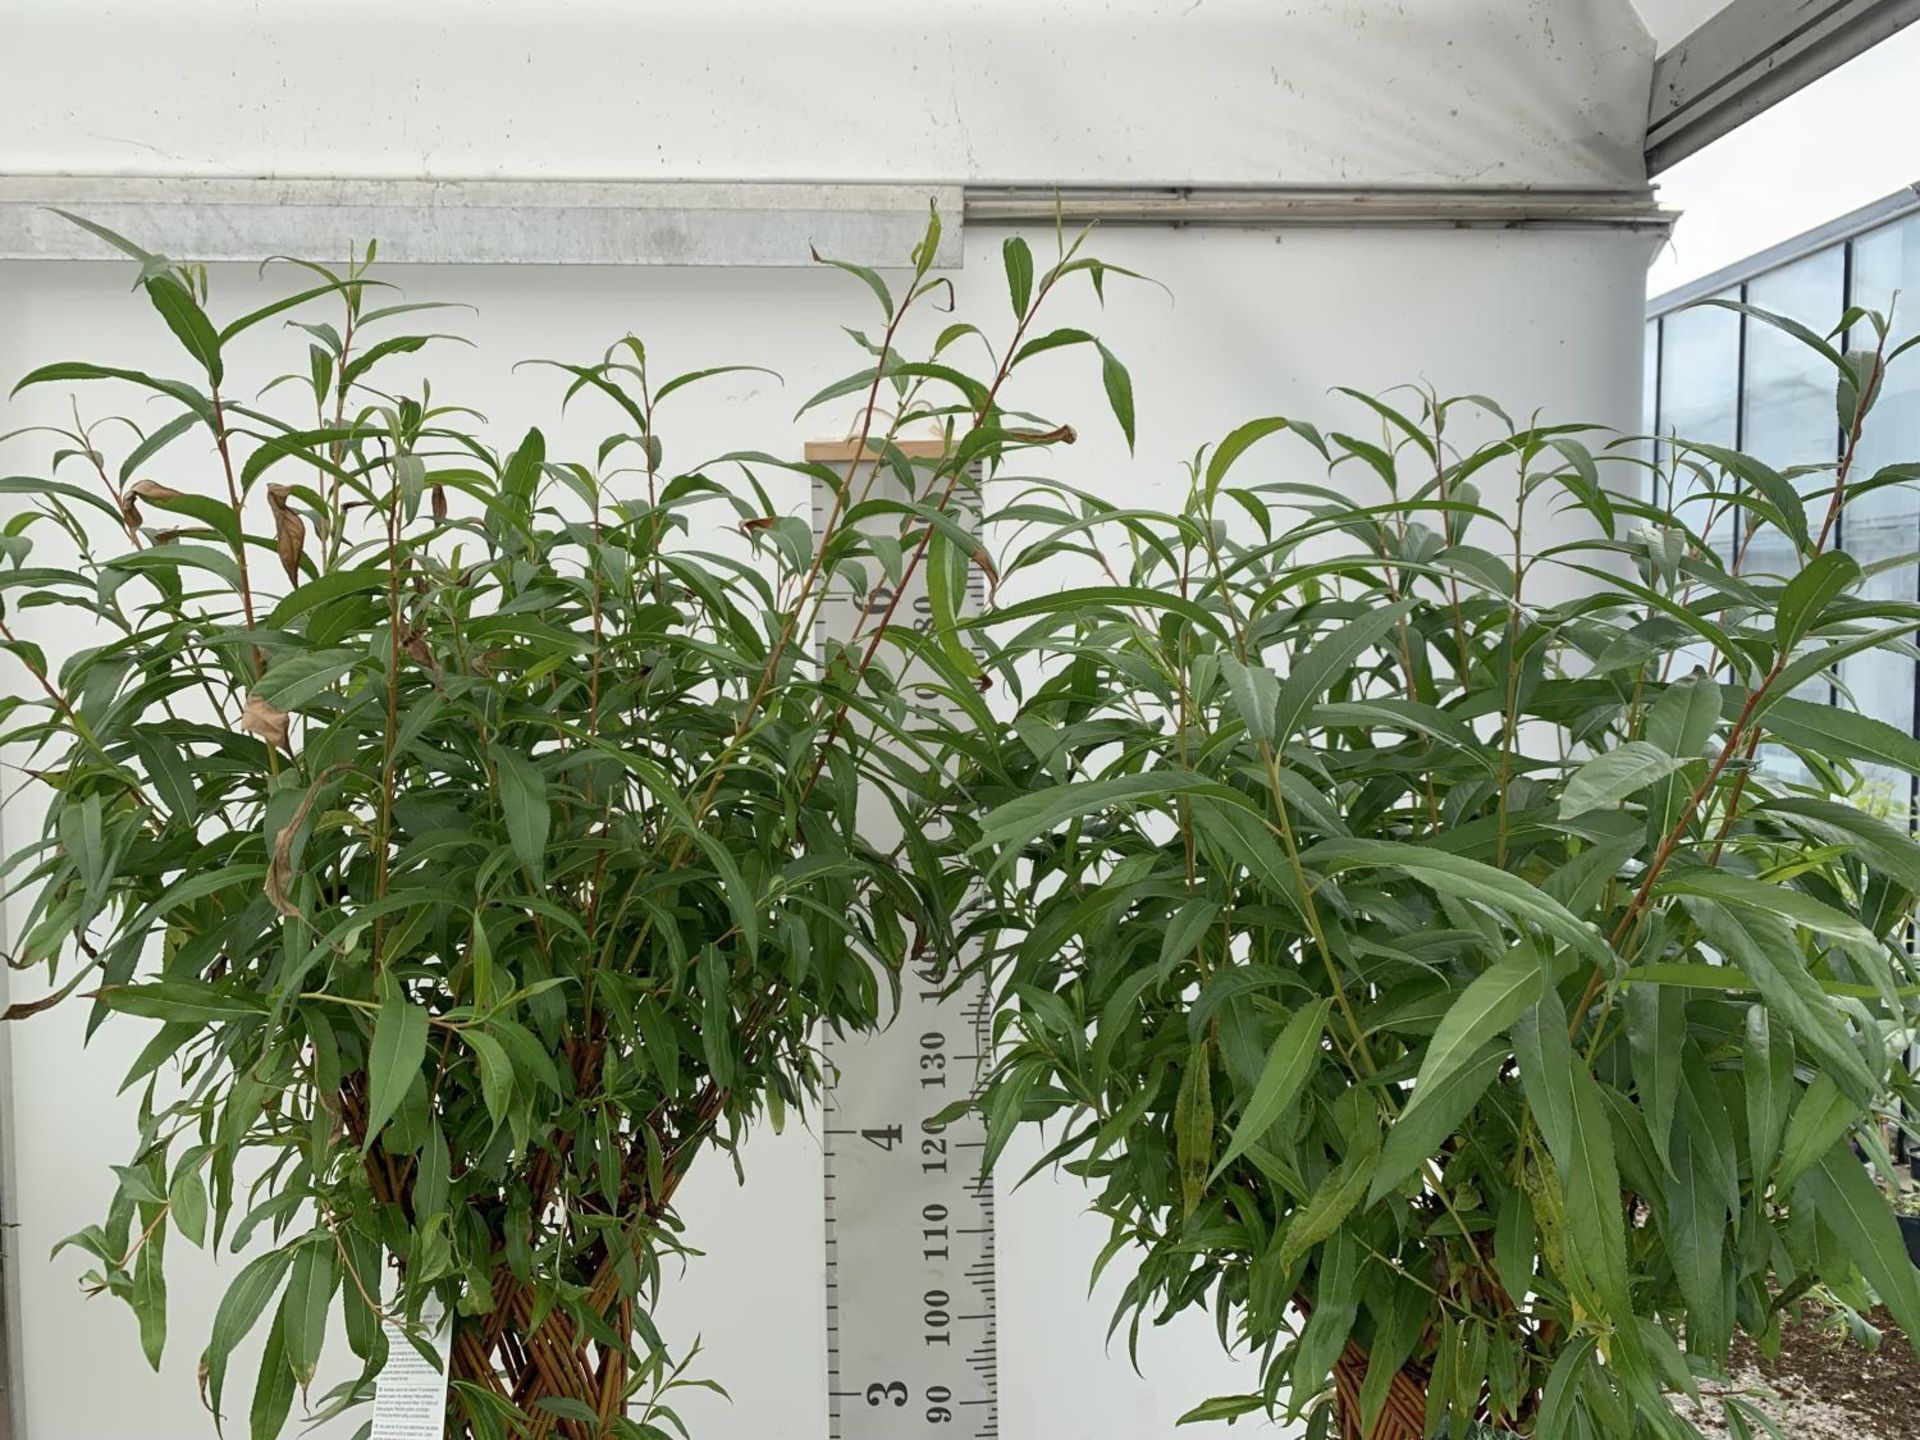 TWO SALIX LIVING WILLOW TREES IN 7.5 LTR POTS OVER 2 METRES IN HEIGHT TO BE SOLD FOR THE TWO PLUS - Image 5 of 22